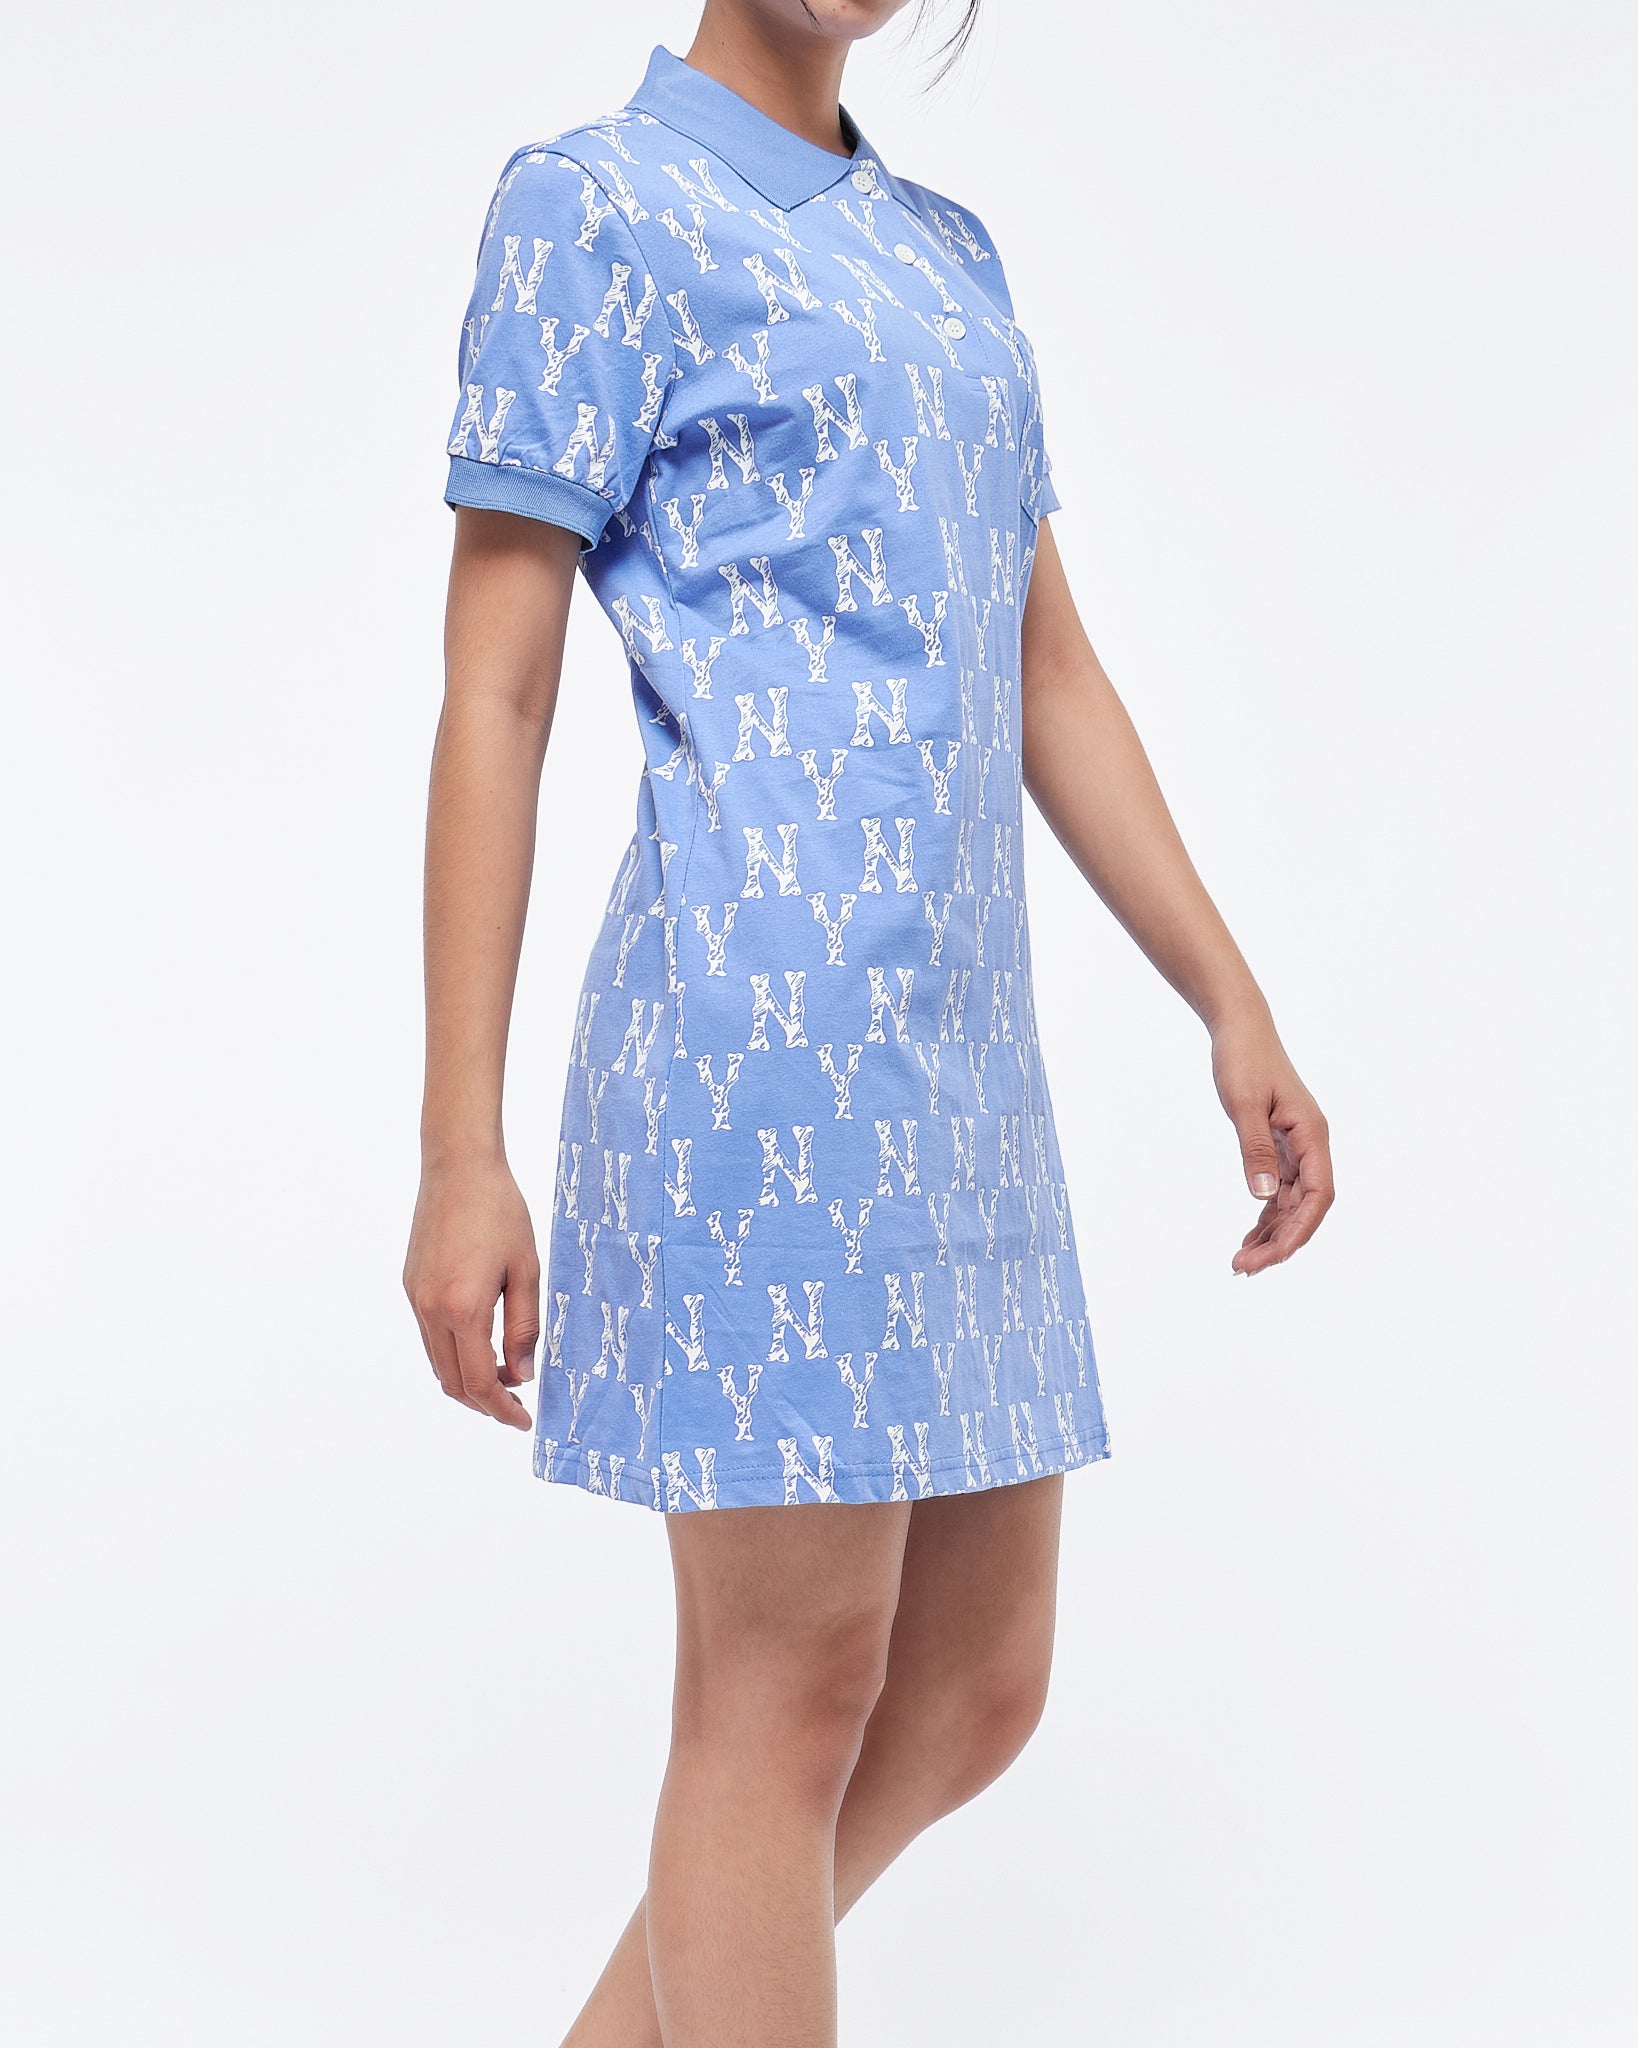 MOI OUTFIT-NY Monogram Over Printed Pocket Lady Polo Dress 25.90